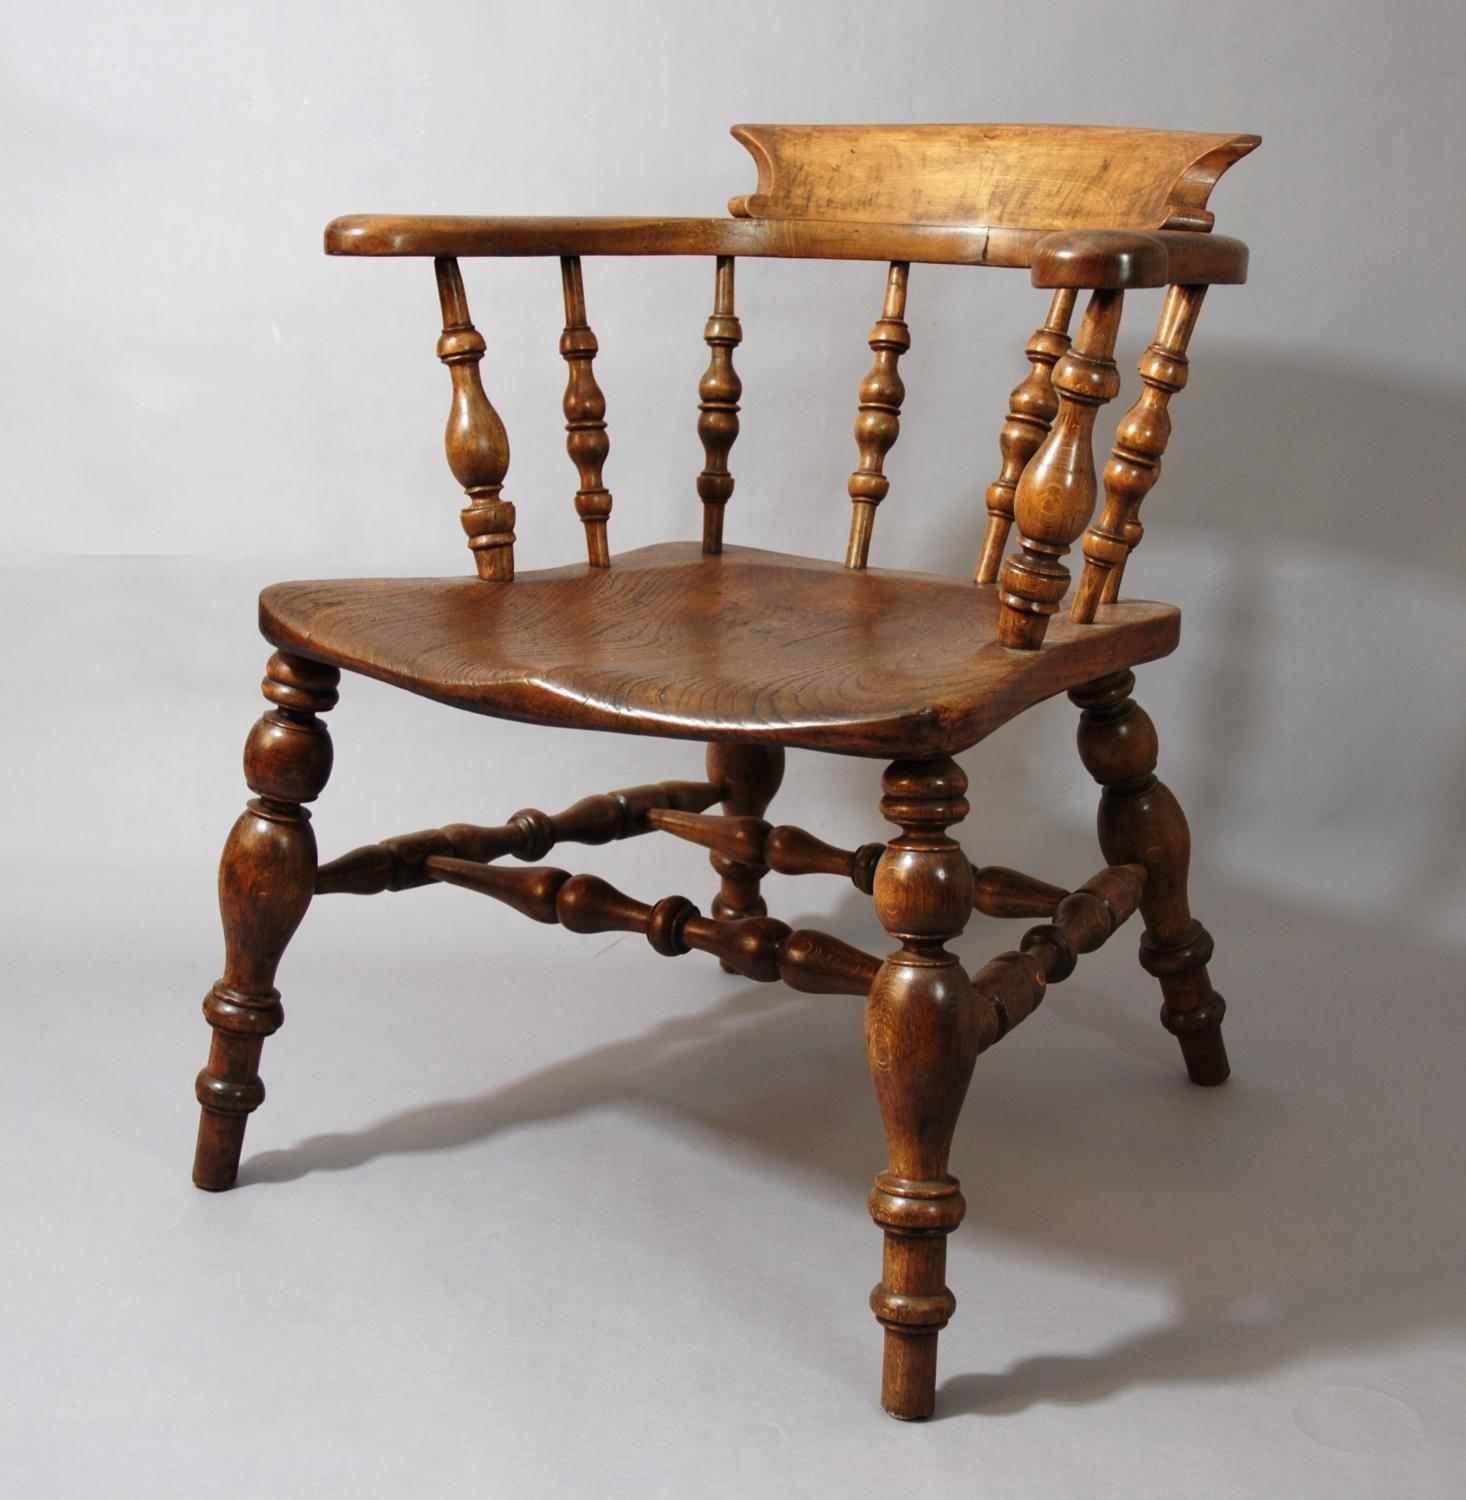 19thc Smokers Bow Windsor chair